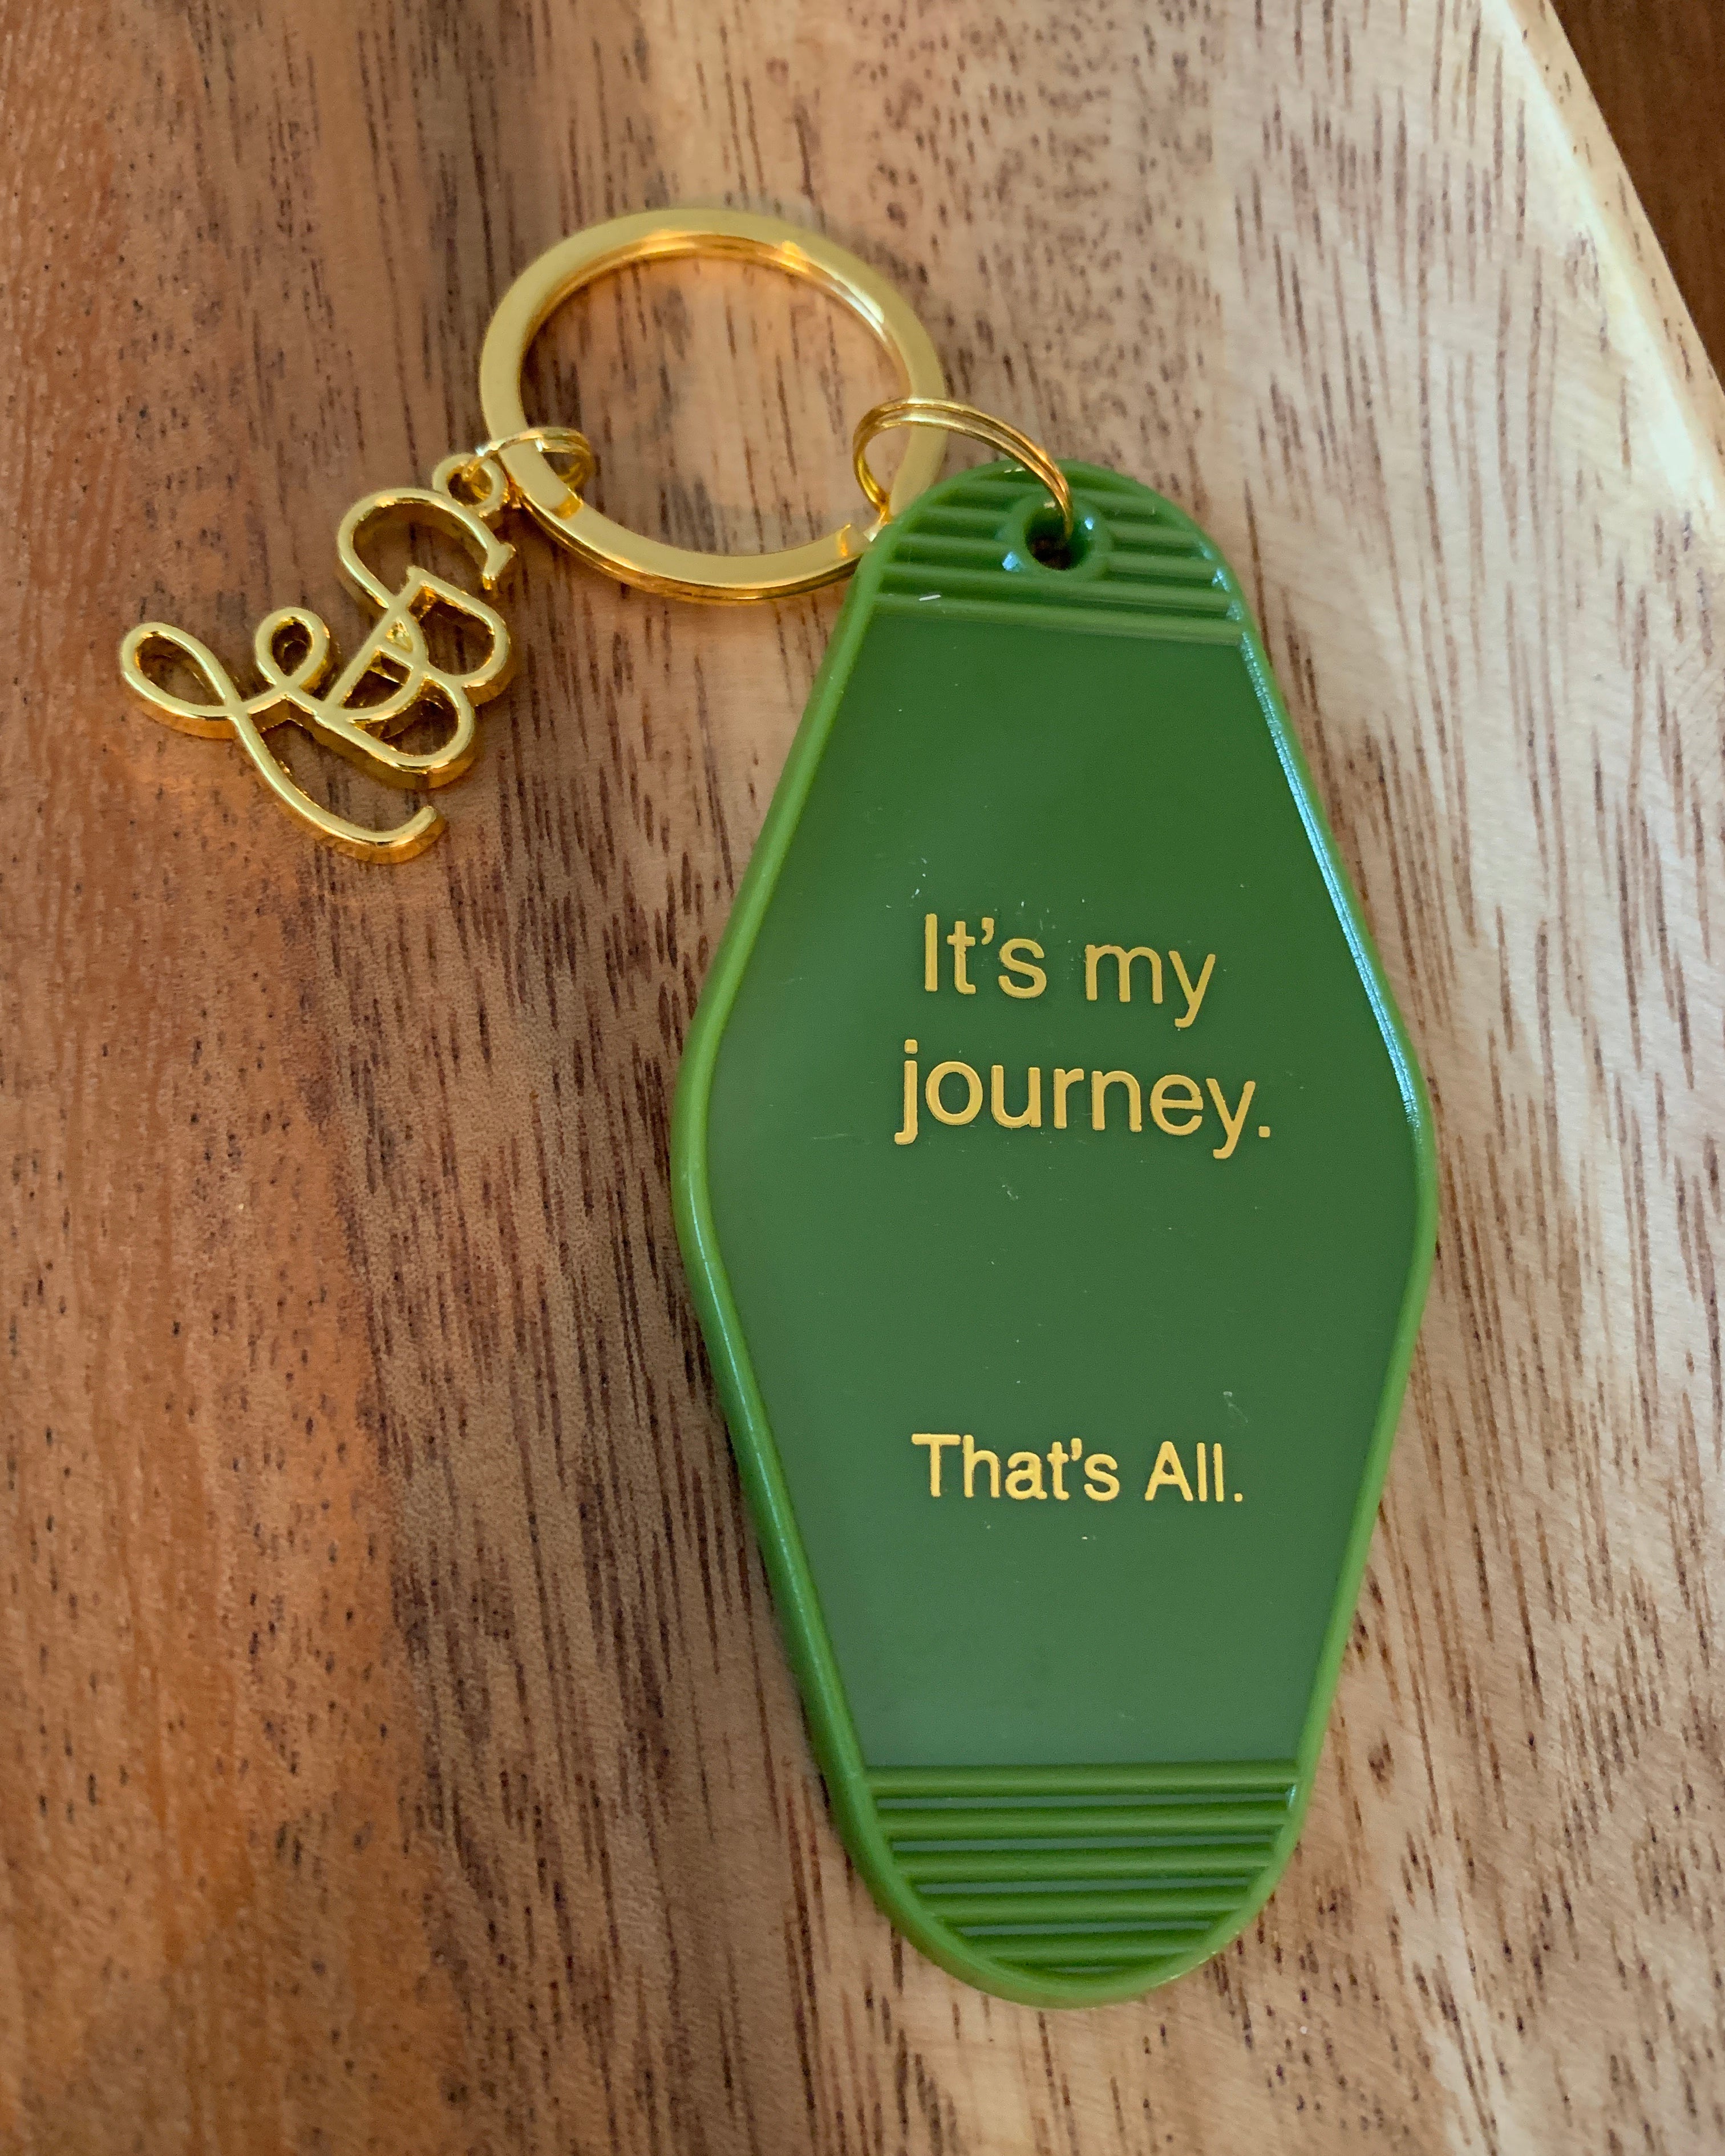 It's my journey. That's All. - Motel Key Tag.